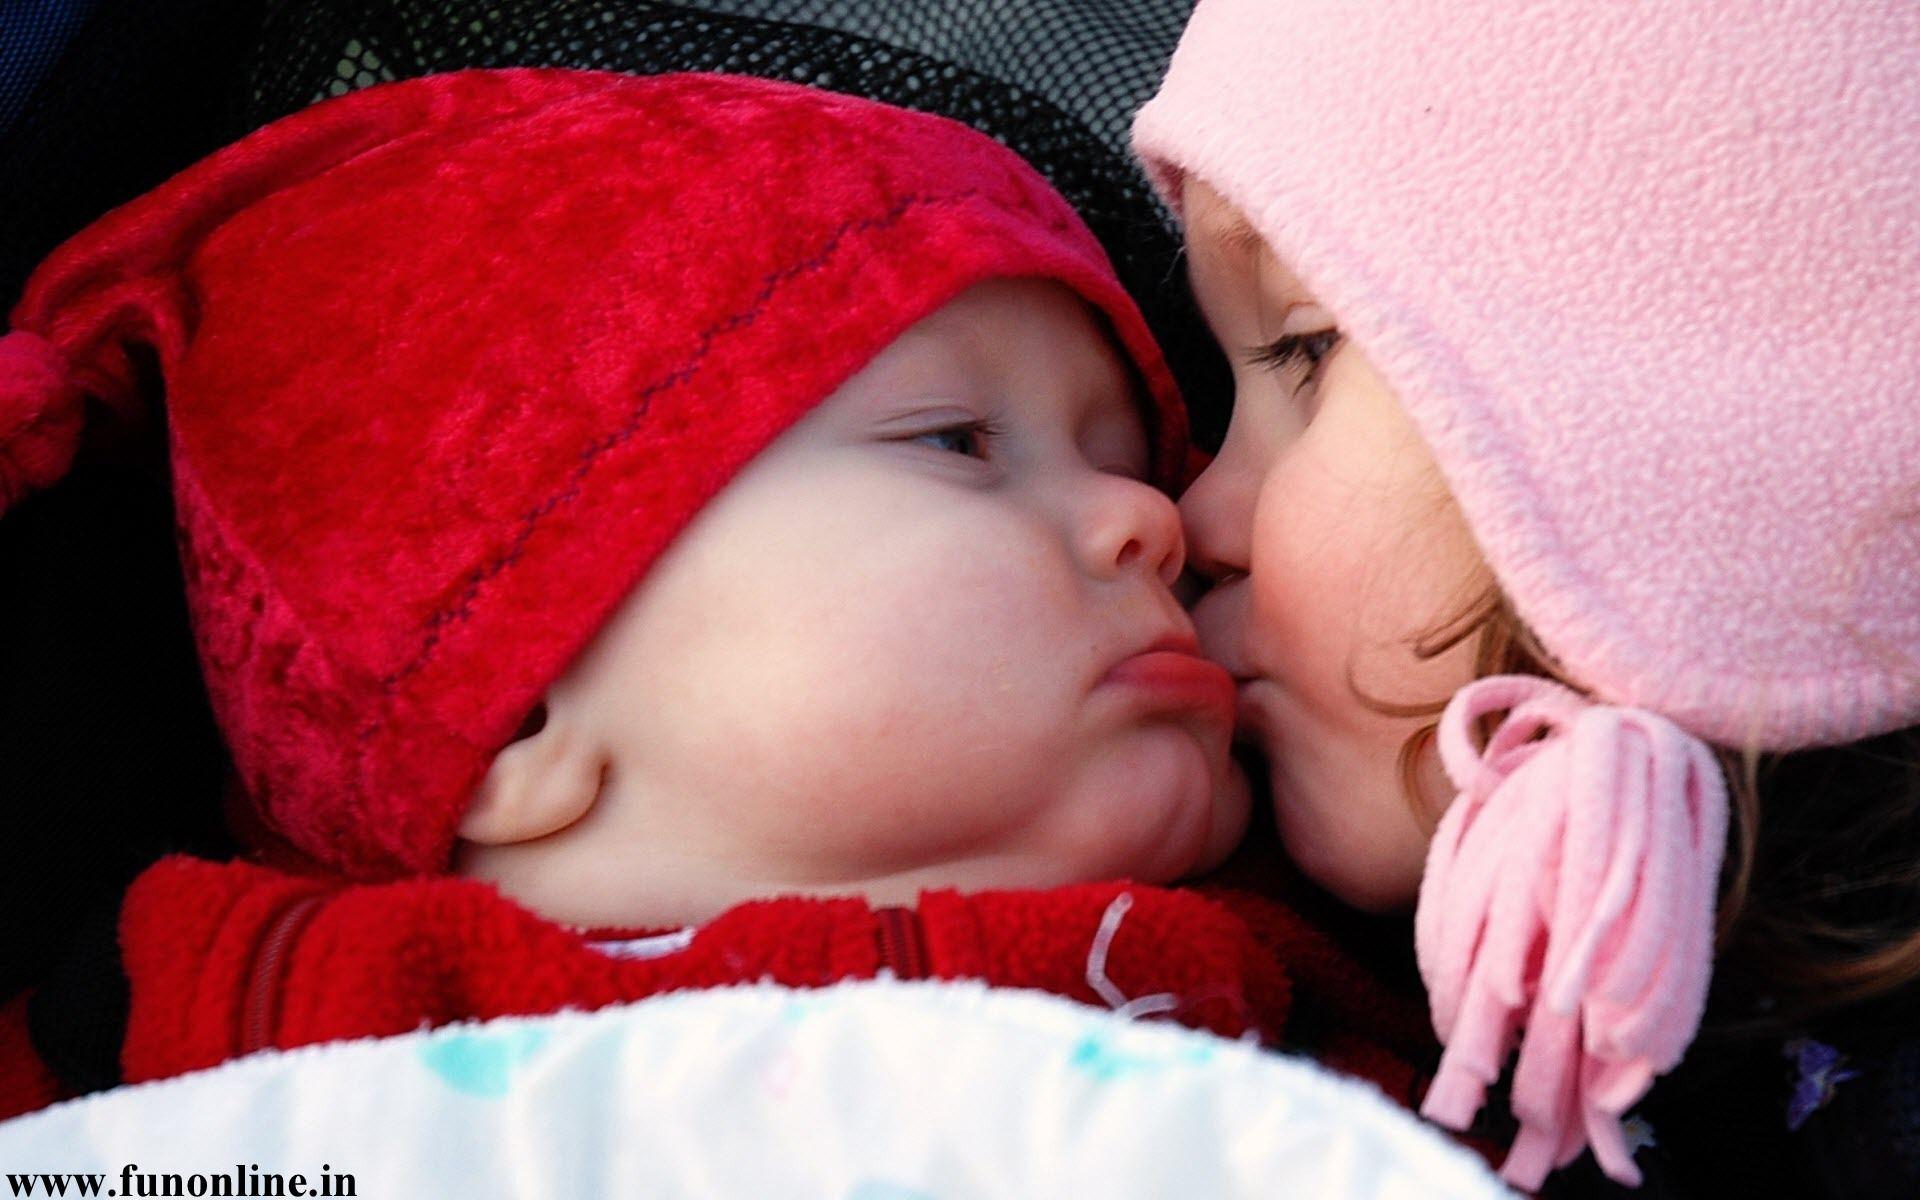 Baby Love Image 4K Background 8. Cute baby wallpaper, Baby kiss